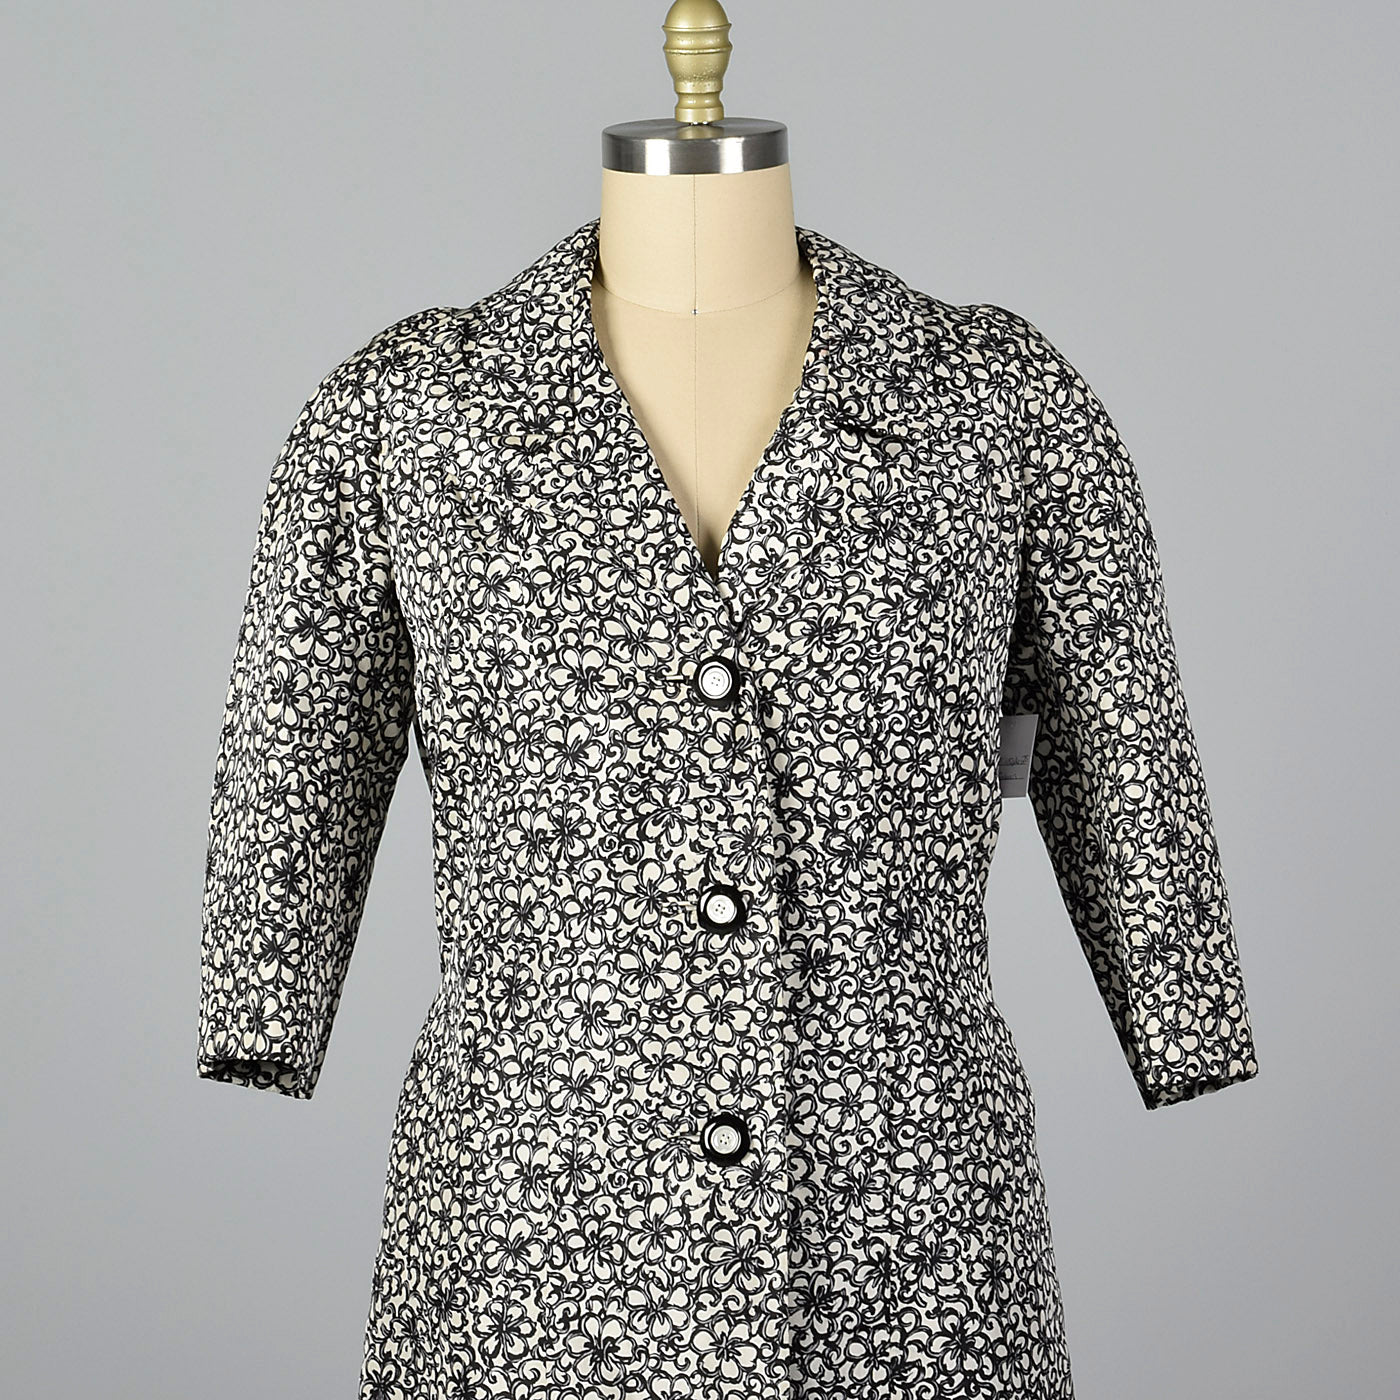 1960s James Galanos Formal Silk Opera Coat in a Black and White Floral